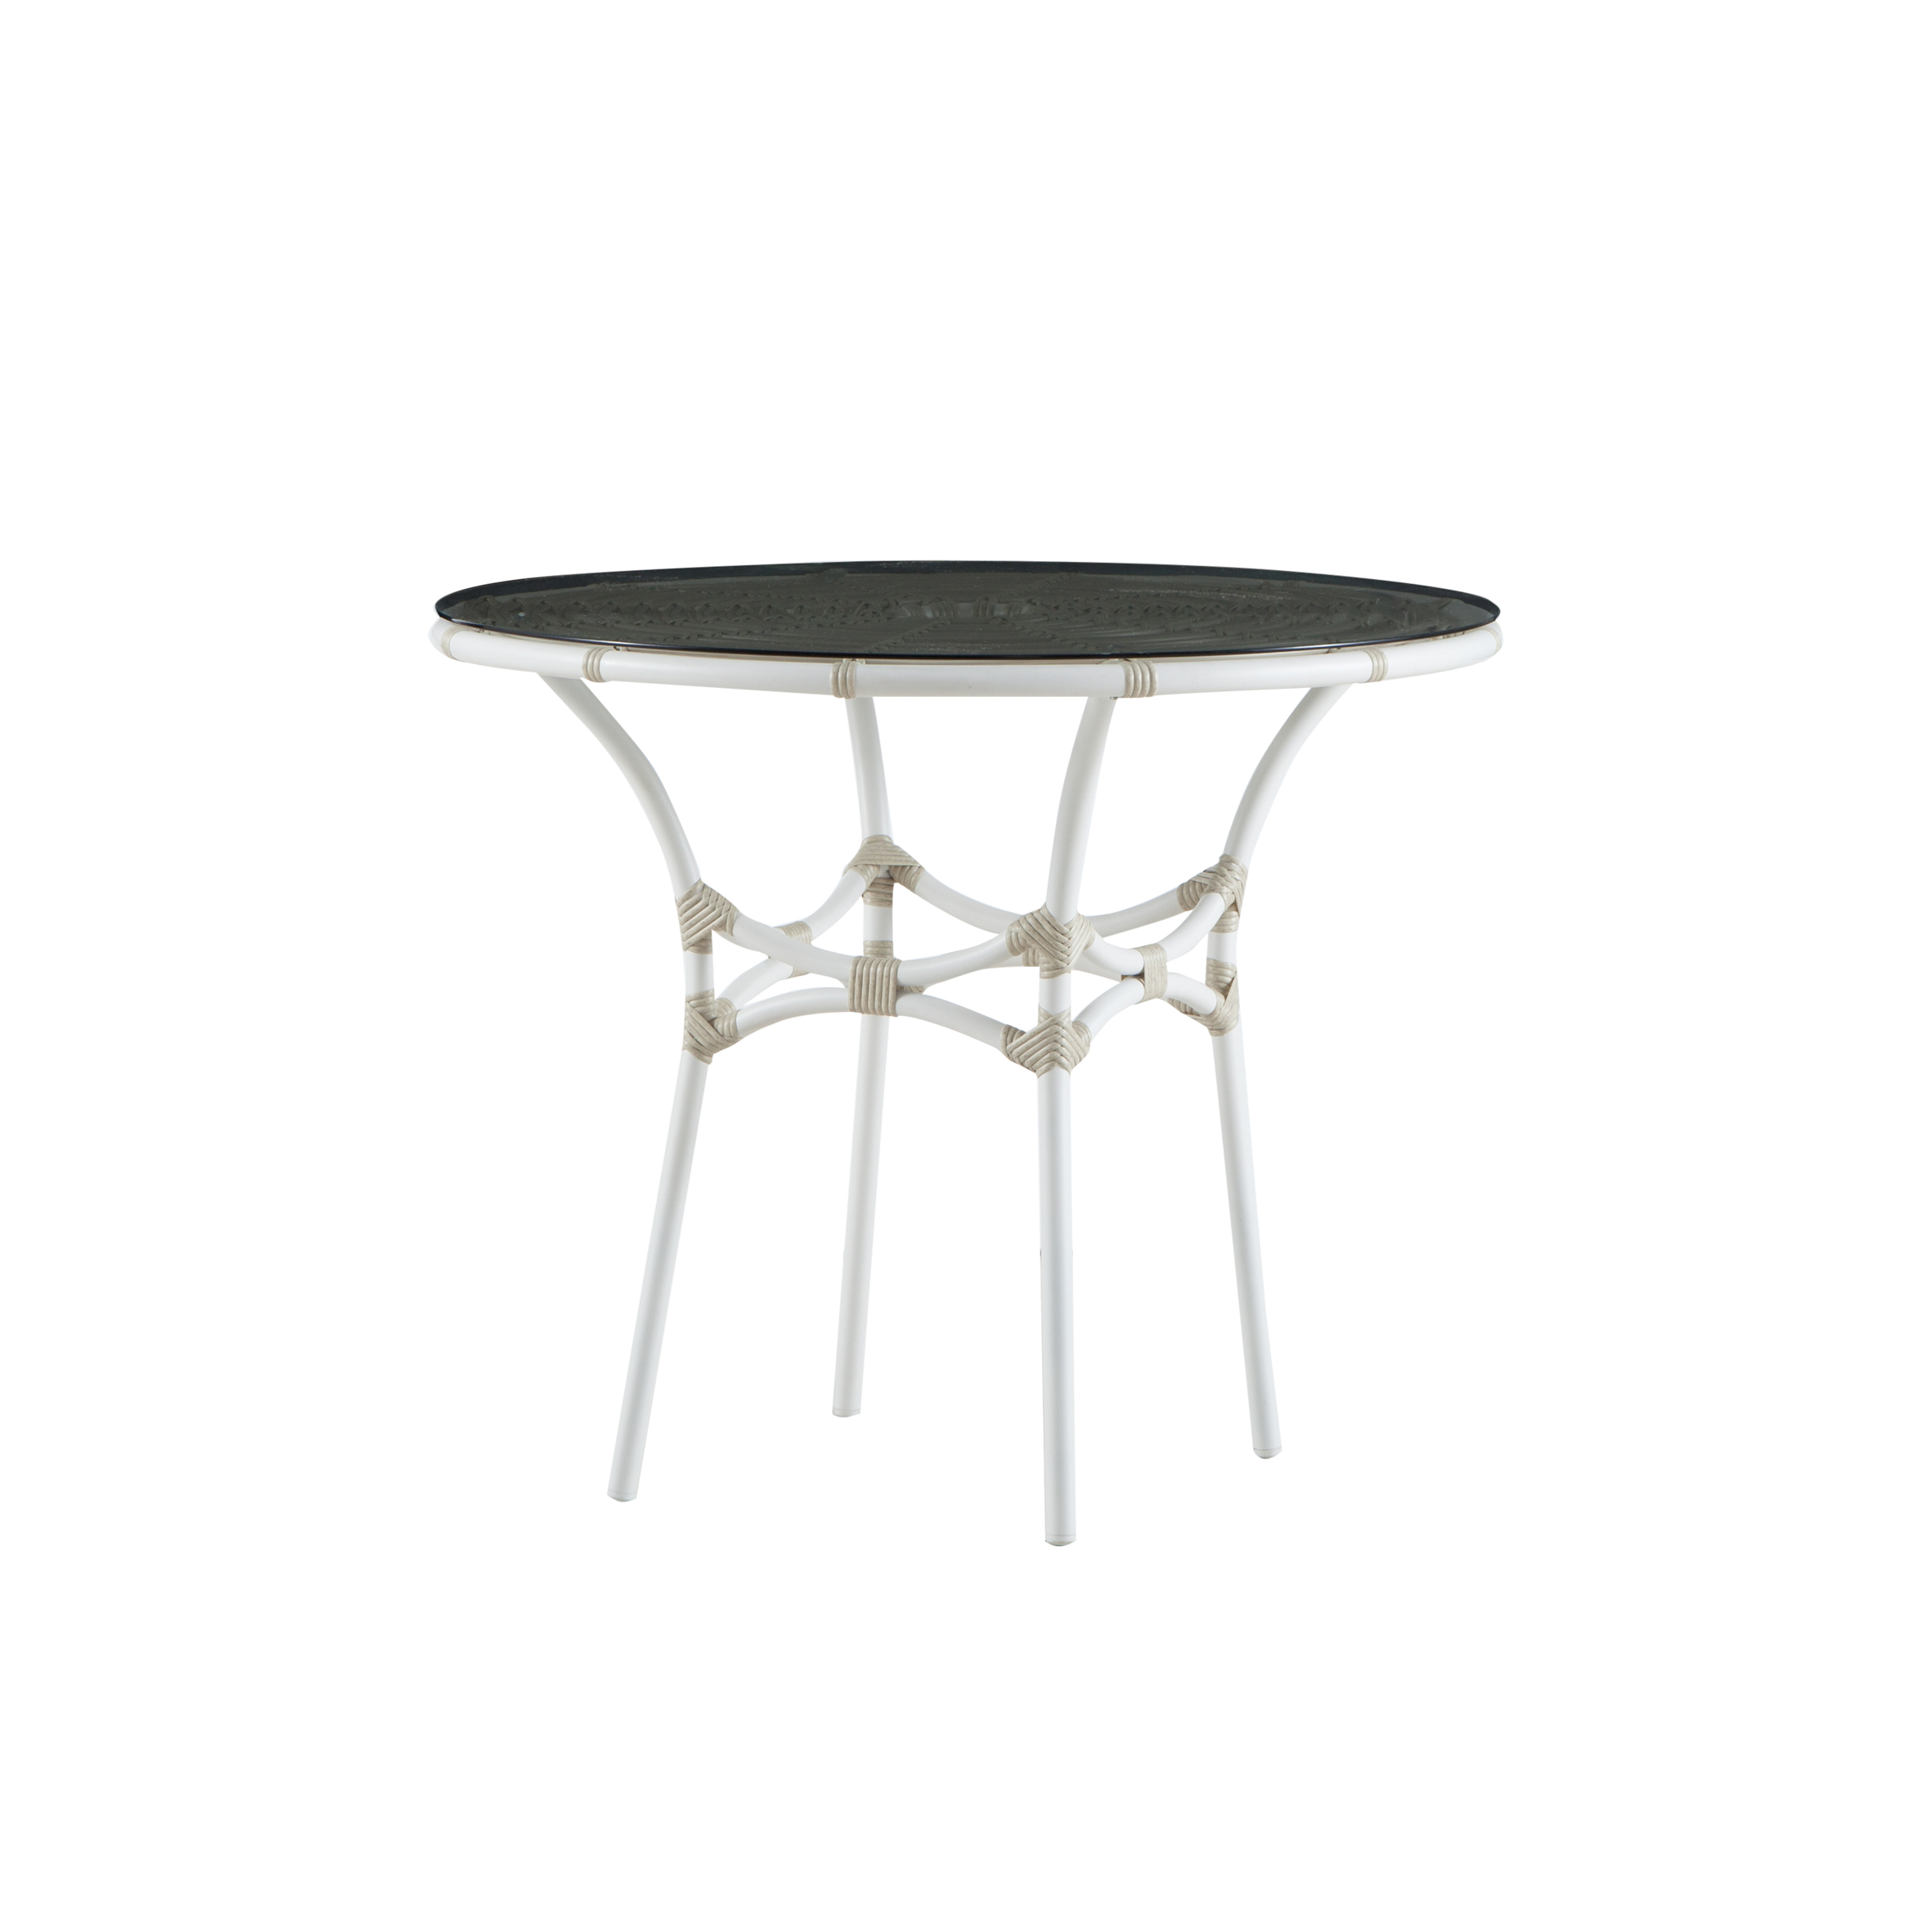 Poetry rattan dining table Featured Image